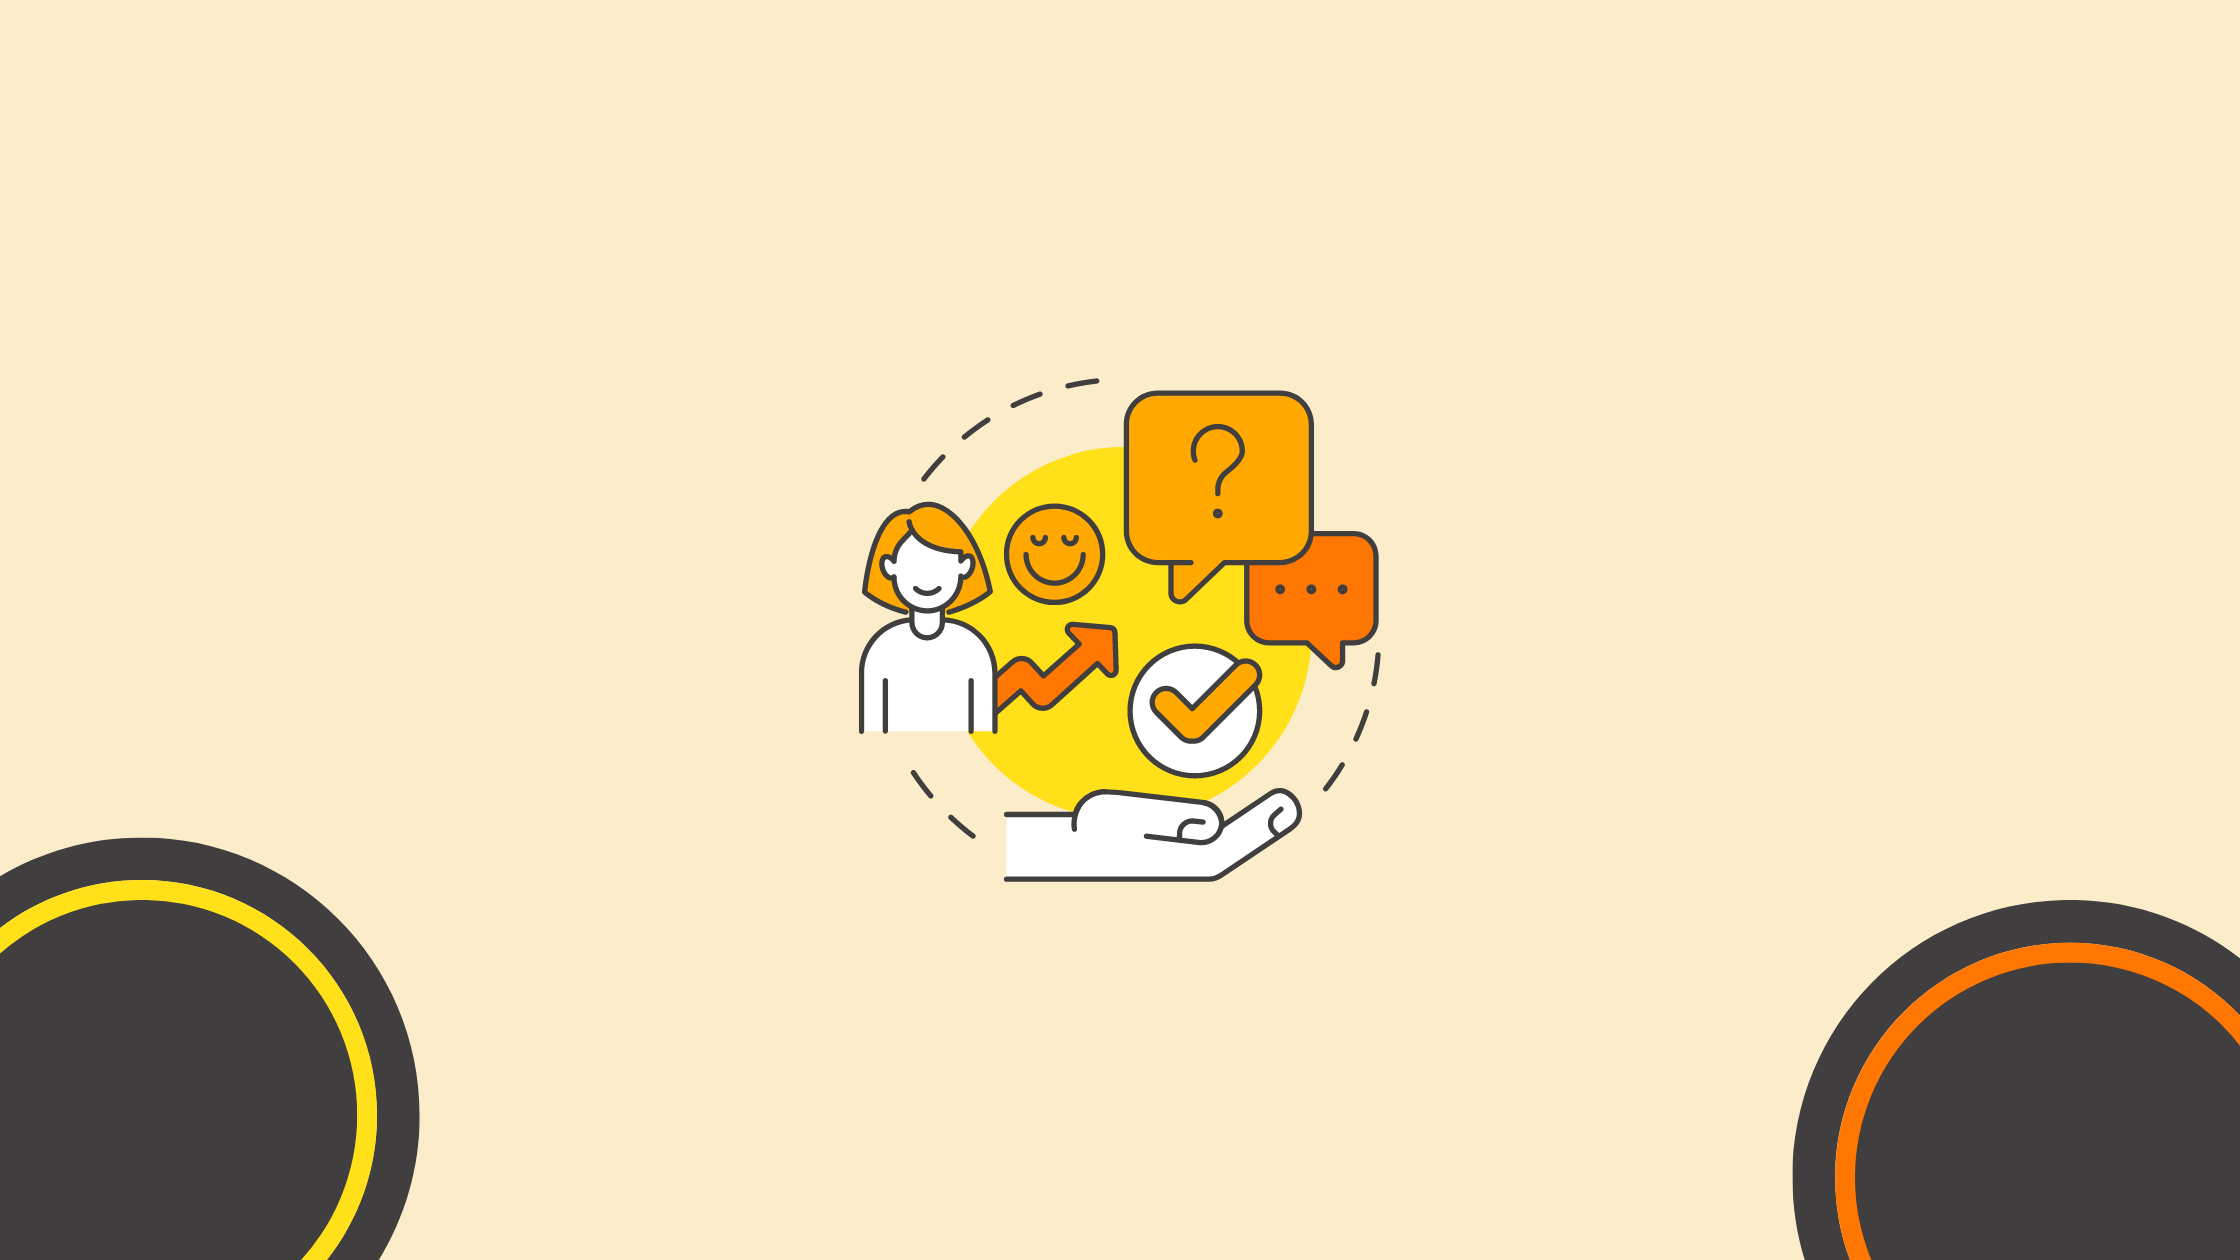 Etsy and Print on Demand - Prompt Customer Service Responses